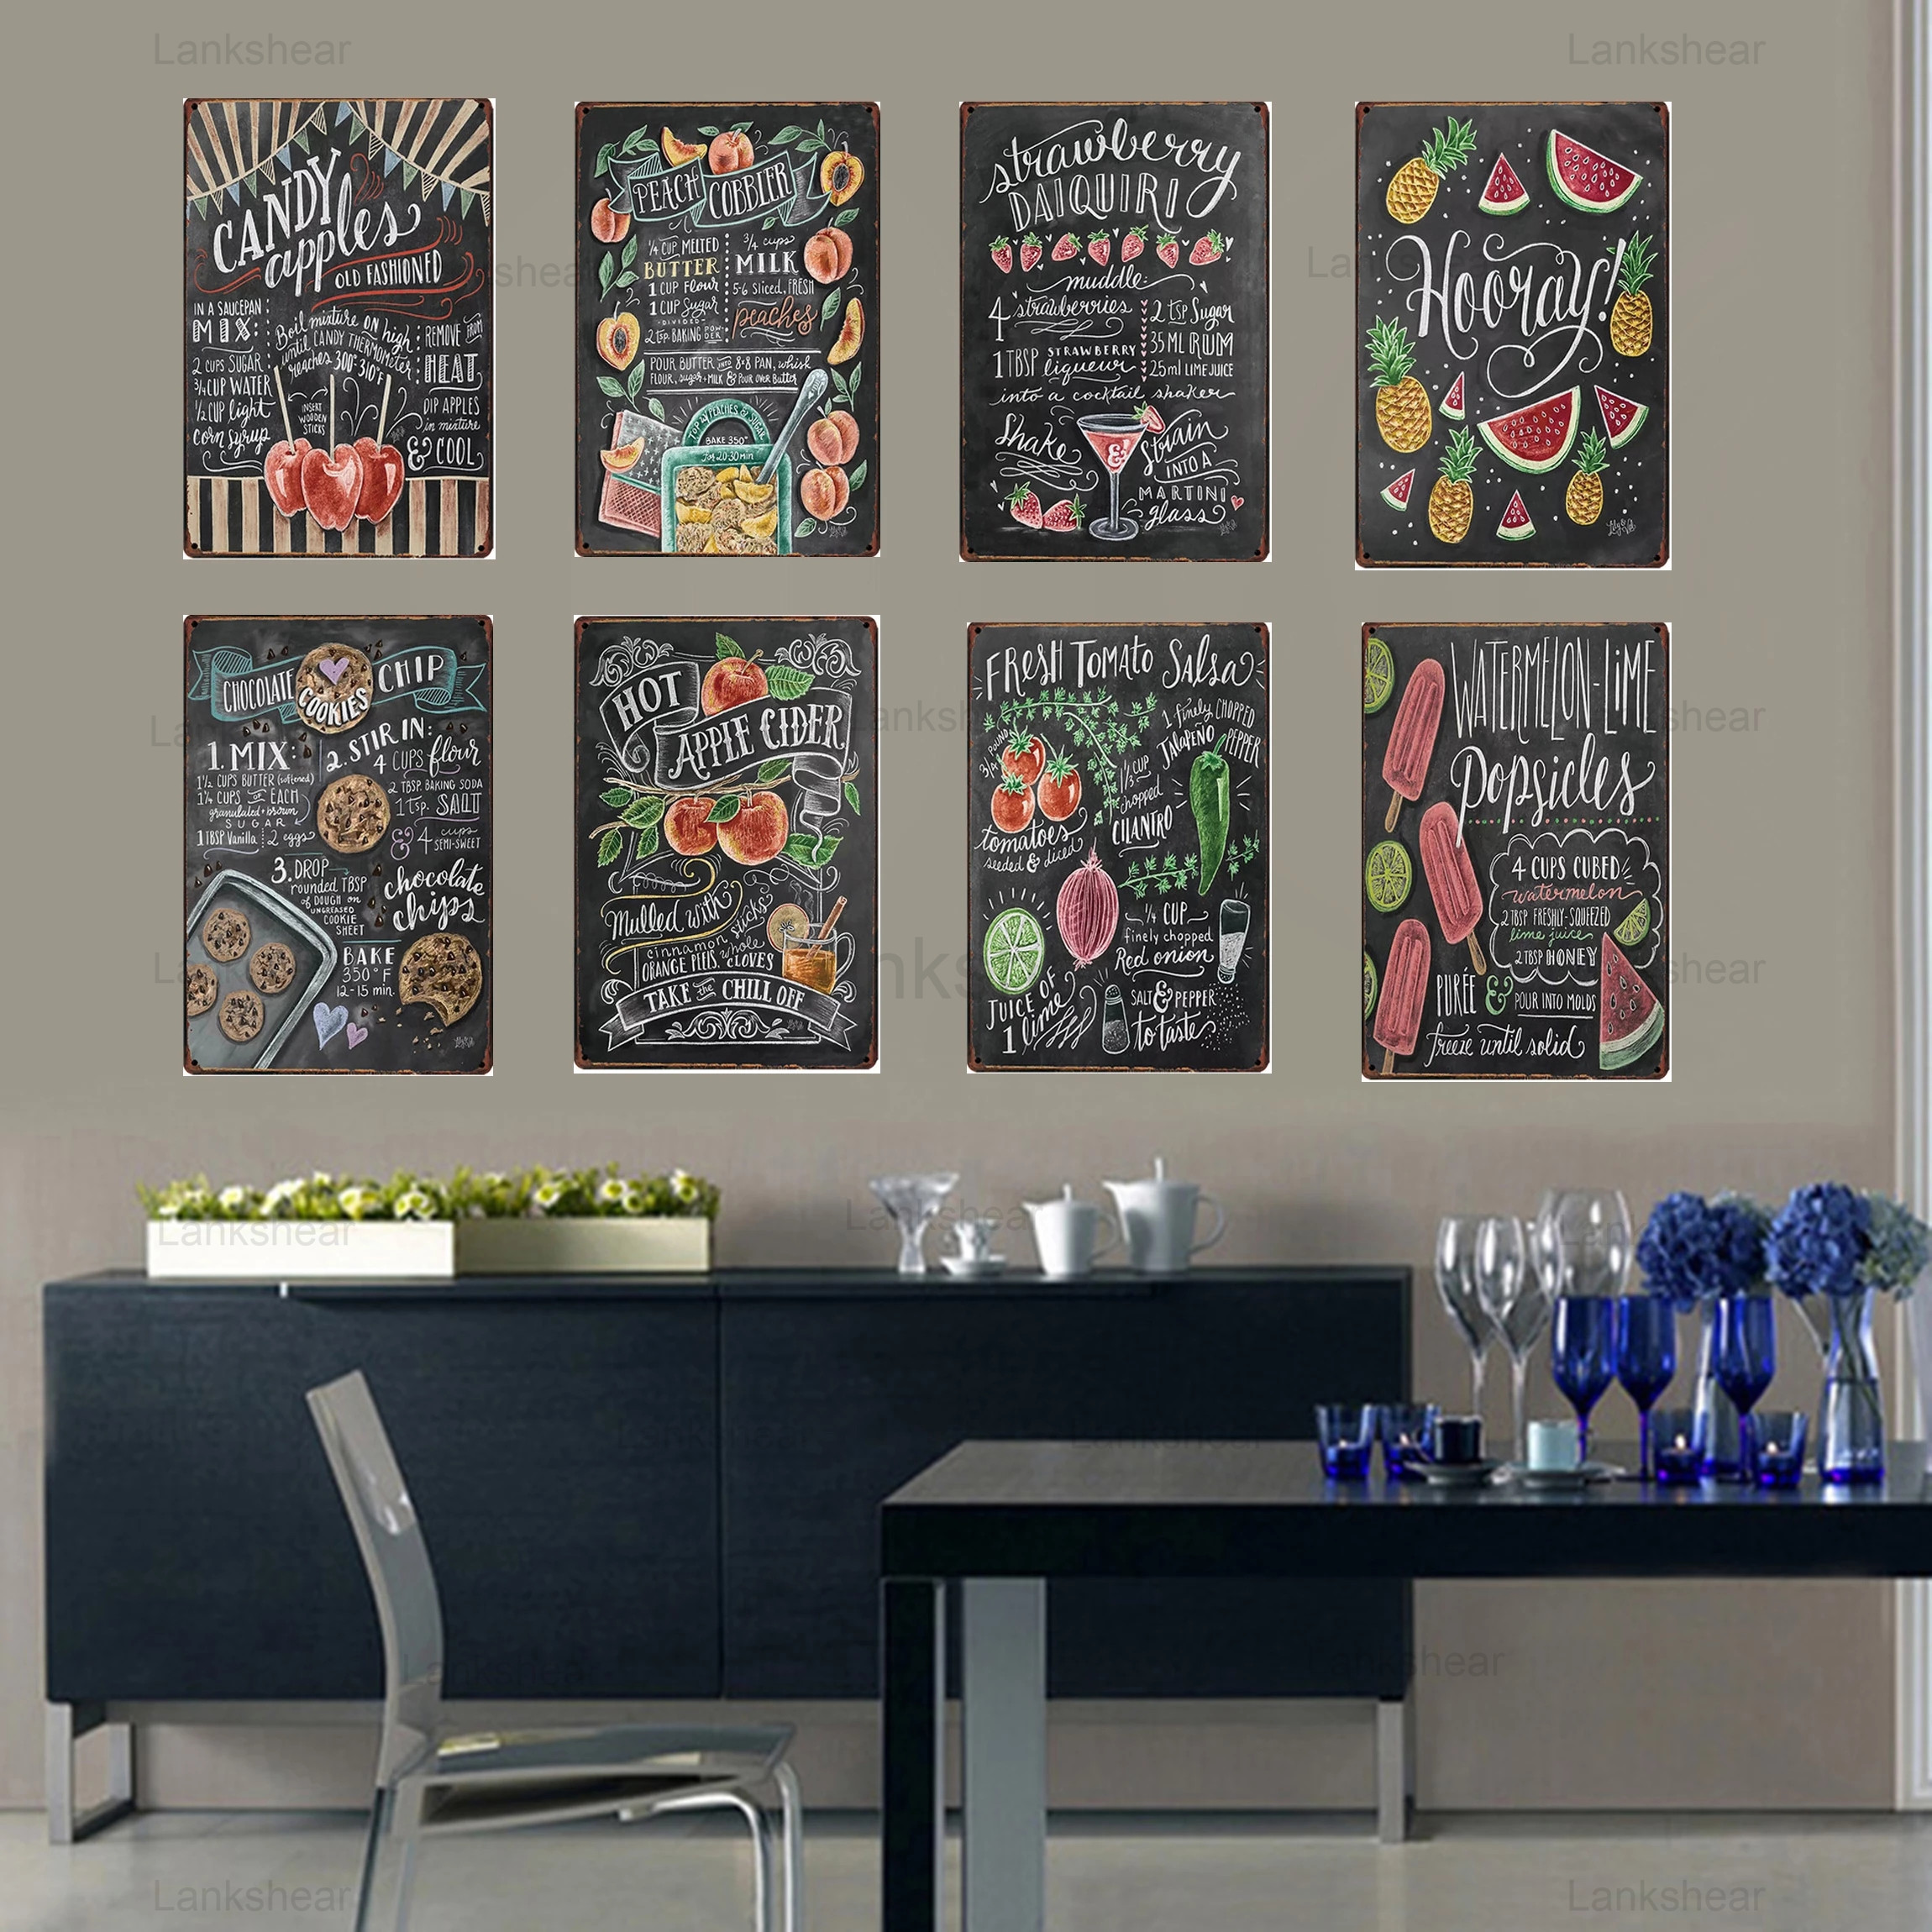 Foods and Drinking Kitchen Tin Sign Decor Metal Plate Wall Pub Restaurant Cafe Home Art Decor Vintage Billboard Iron Poster